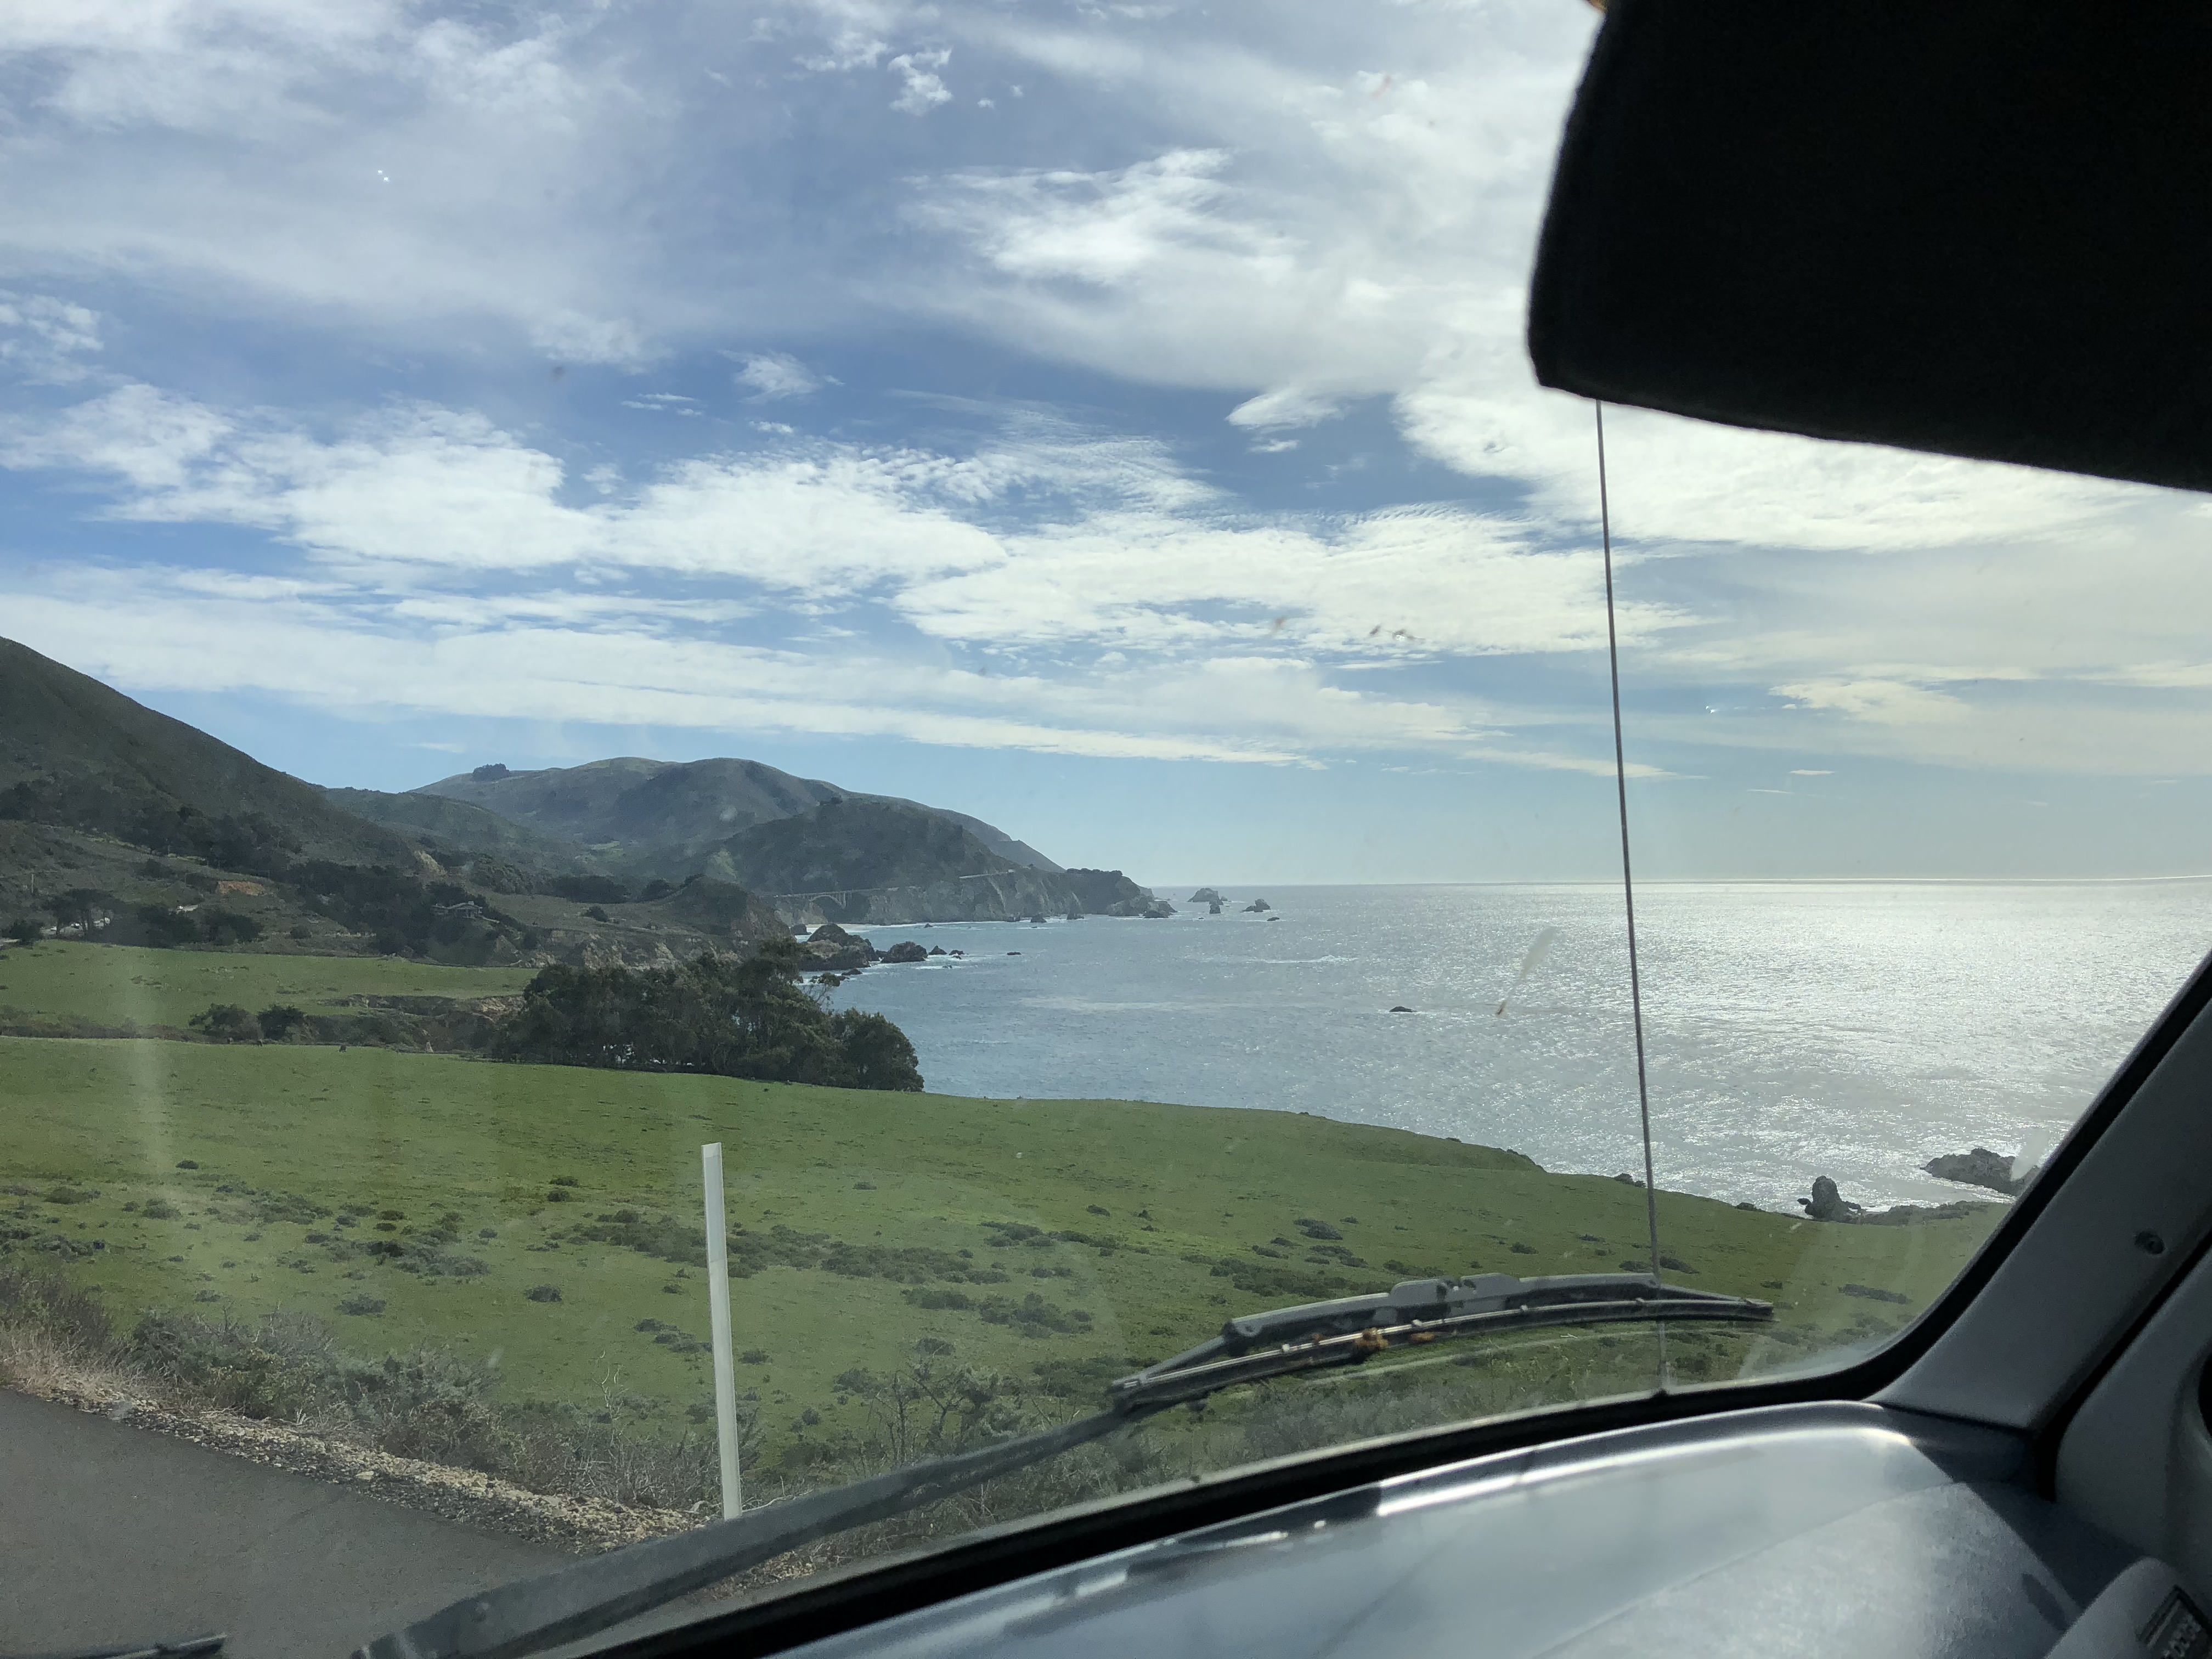 A view of Highway 1 from my car